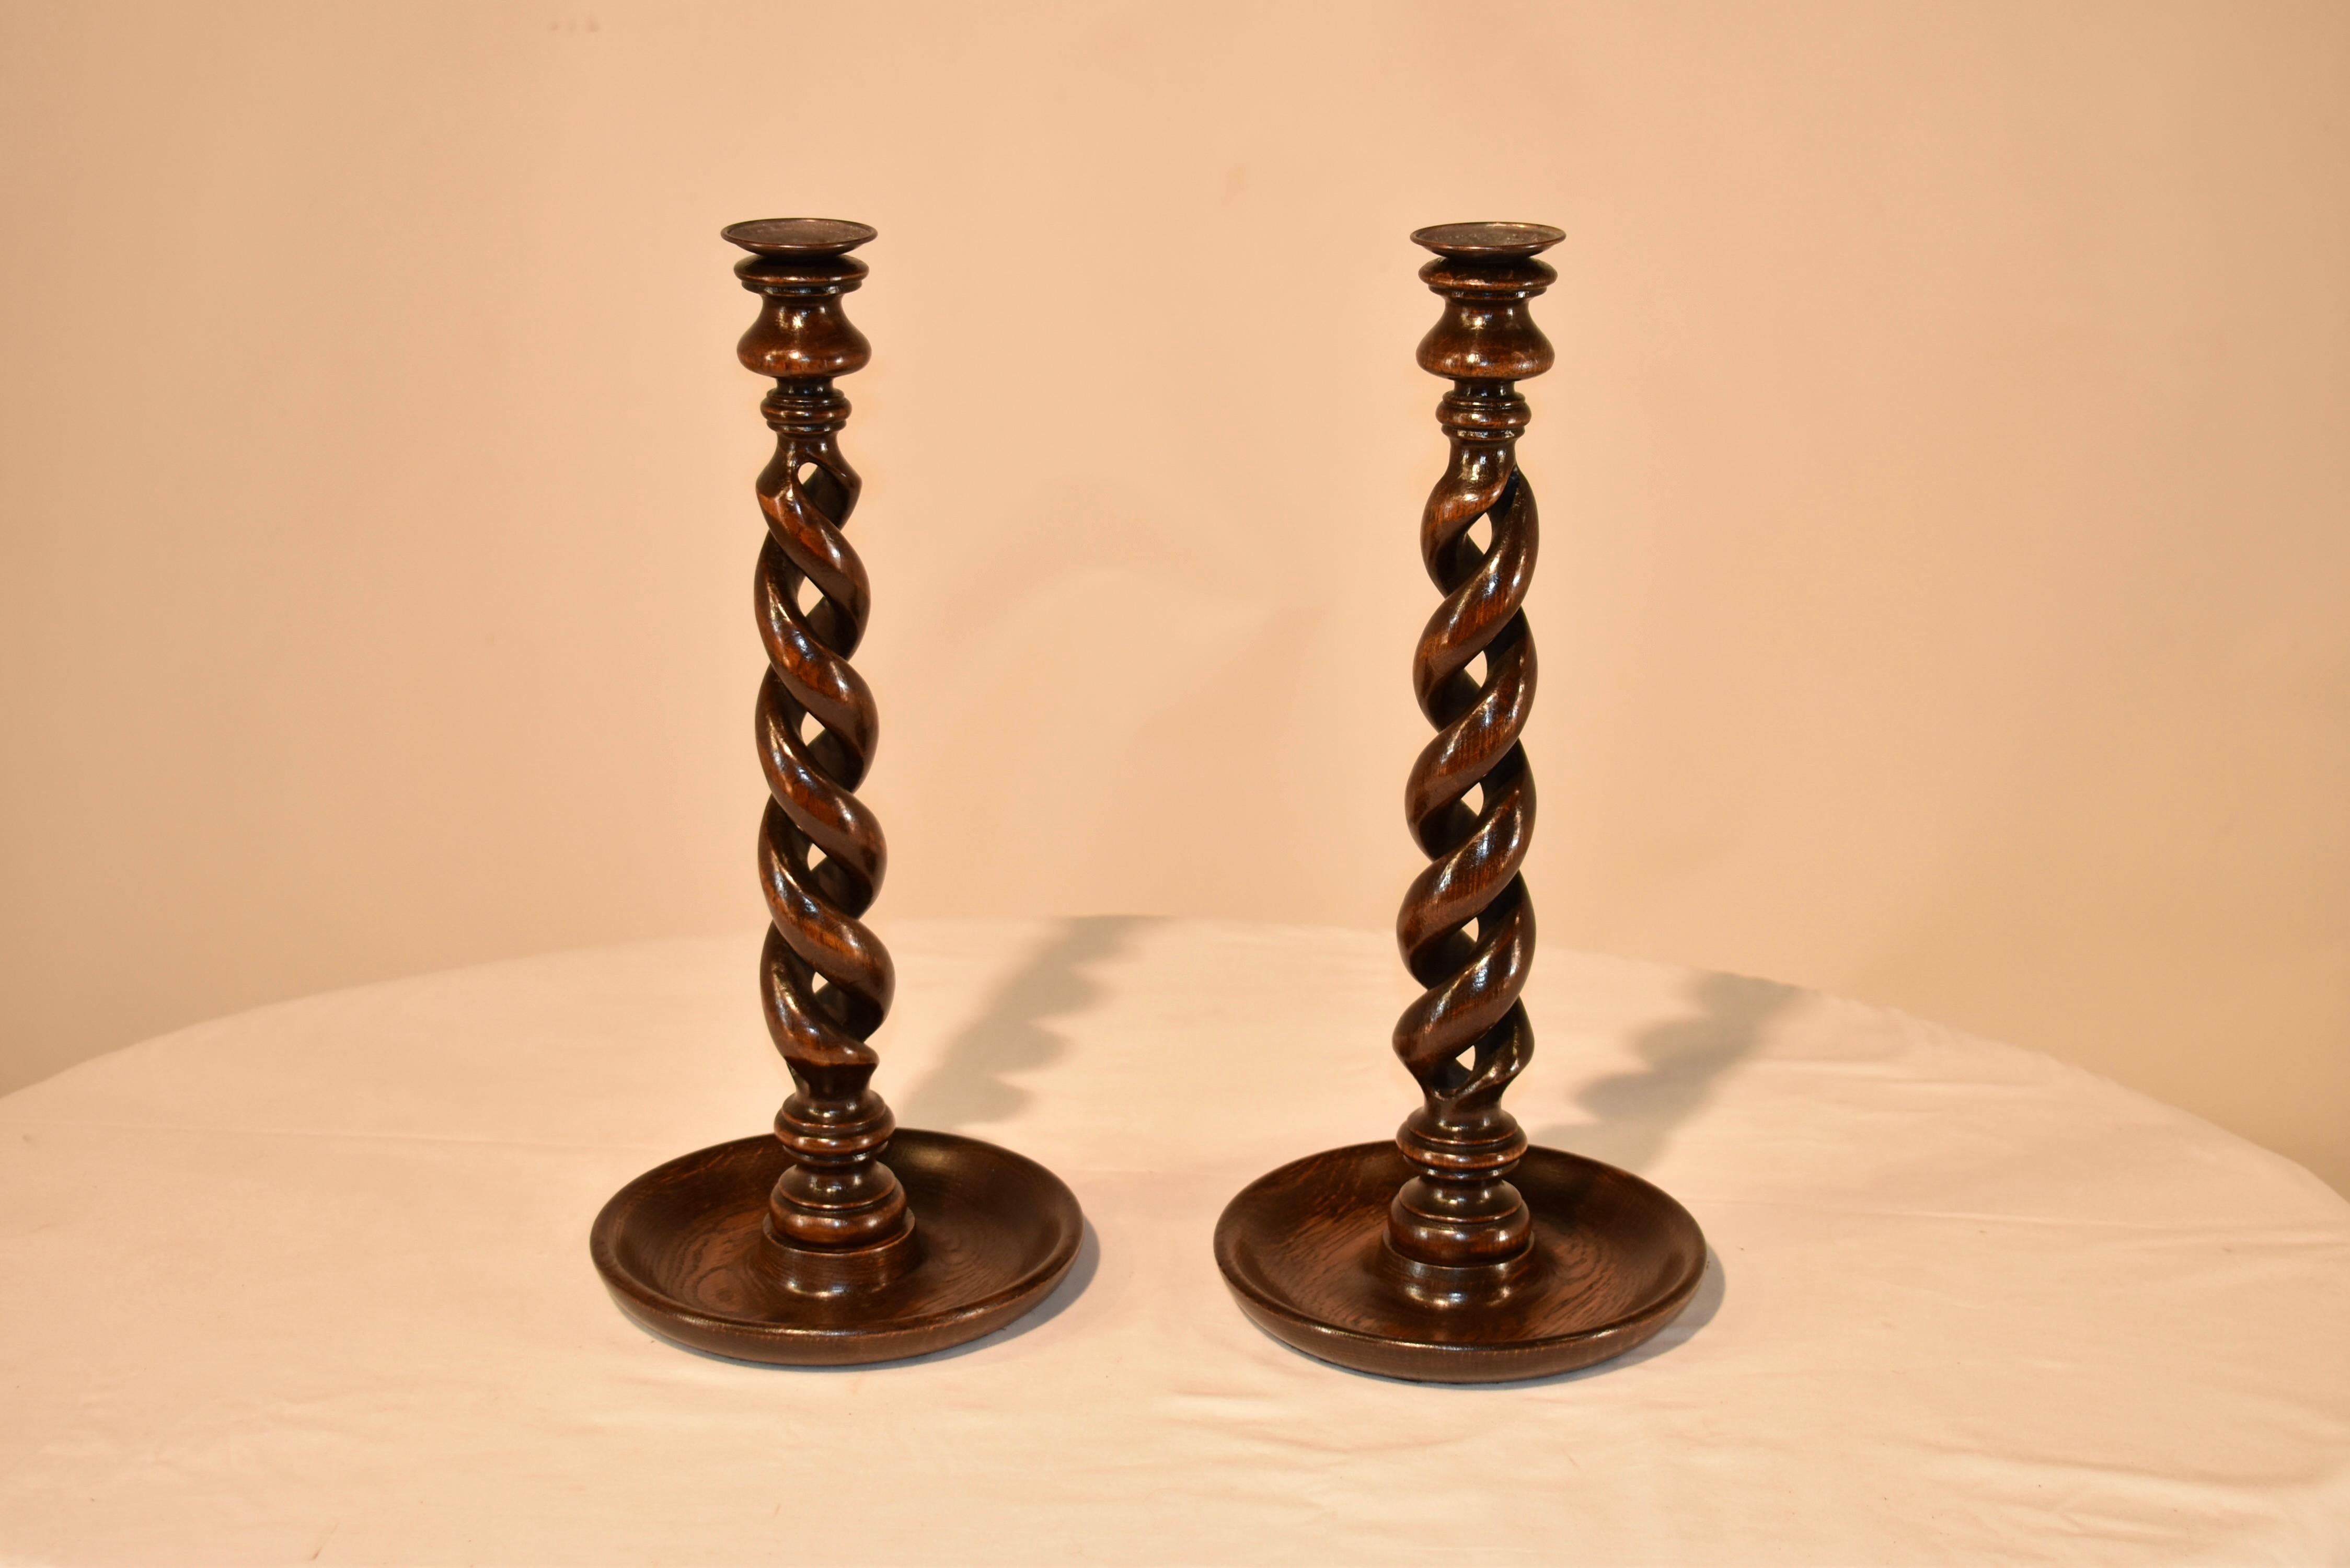 Pair of 19th century English oak tall candlesticks. They have brass bobeches over hand turned candle cups, supported on exquisitely hand turned open barley twist stems. The bases are hand turned dish shaped bases and the overall height is 16.25